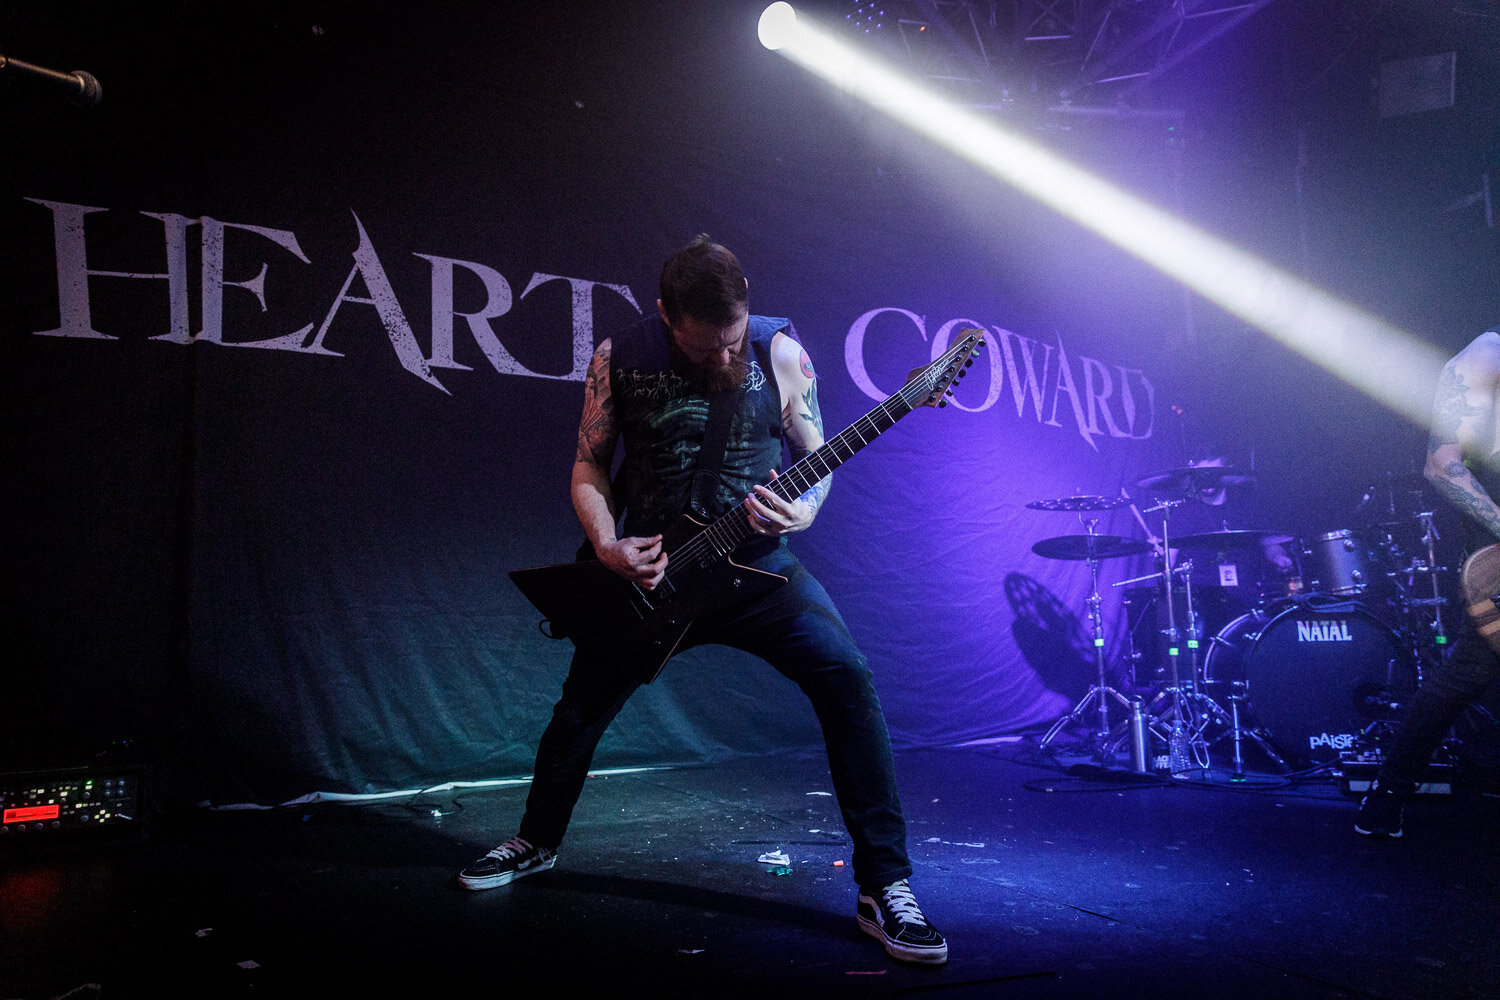 Heart Of A Coward at the Live Rooms in Chester on November 26th 2019 ©Johann Wierzbicki | ROCKFLESH